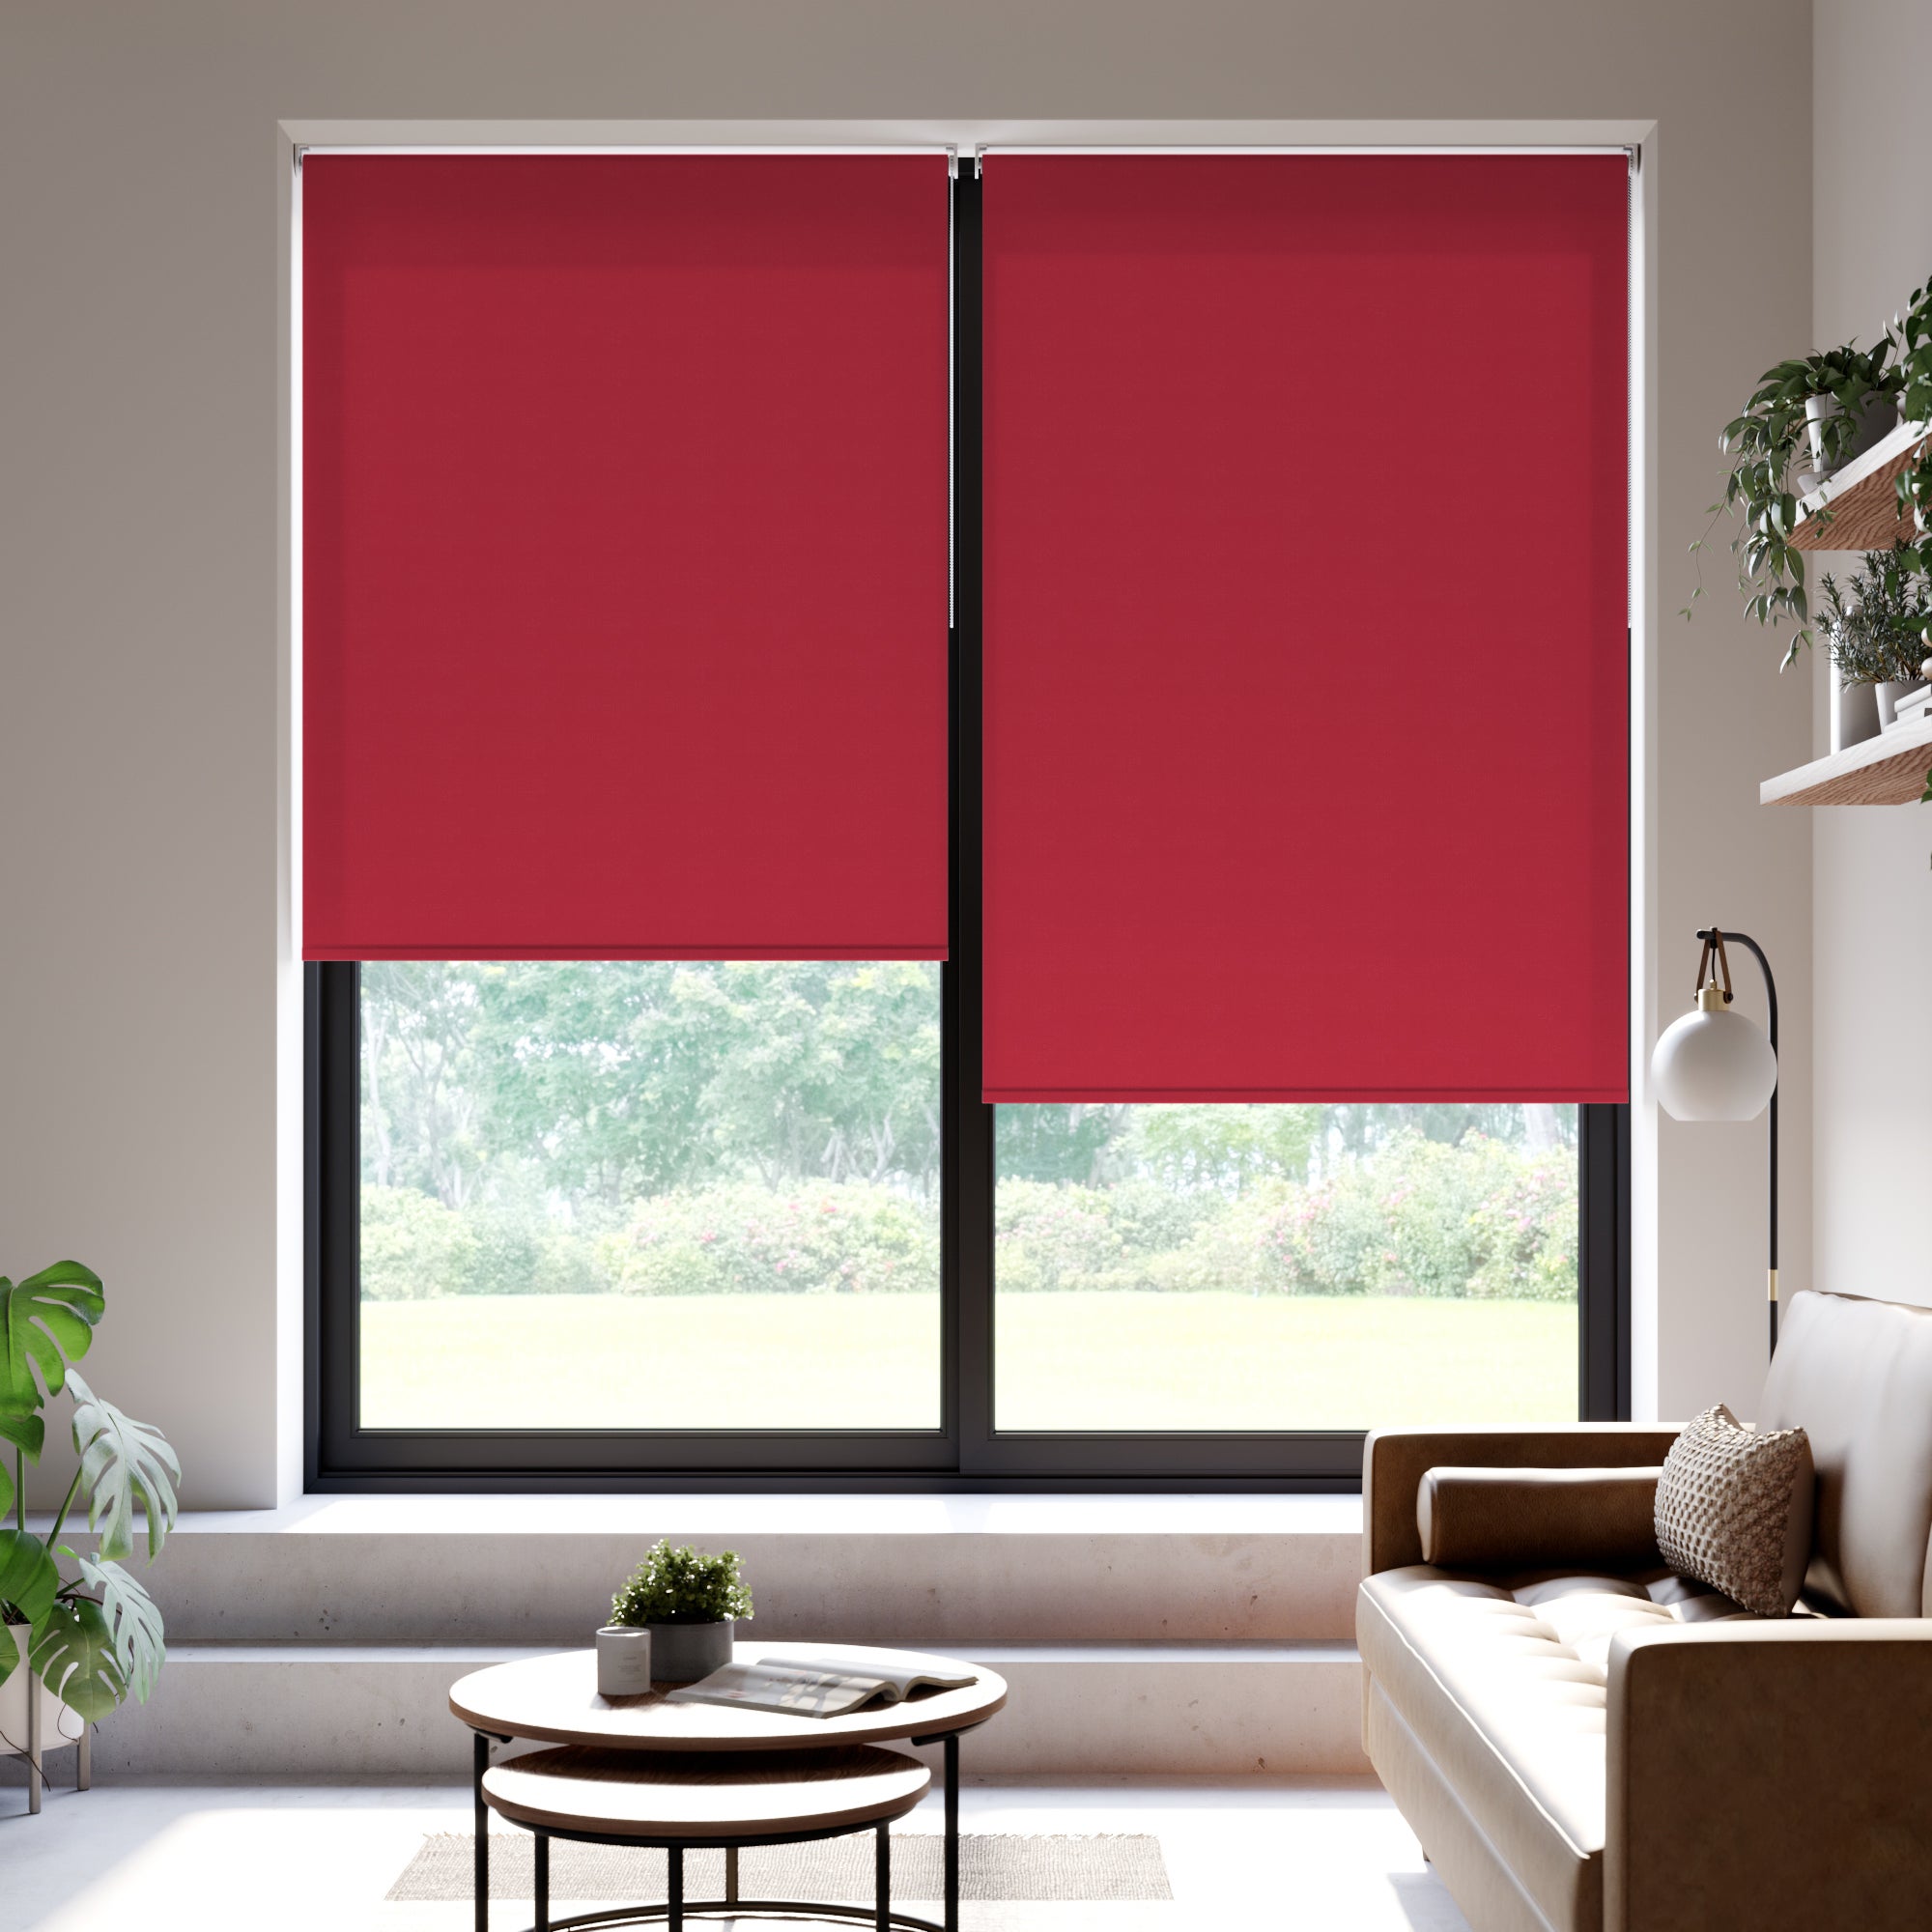 Iona Daylight Made to Measure Flame Retardant Roller Blind Fabric Sample Iona Scarlet